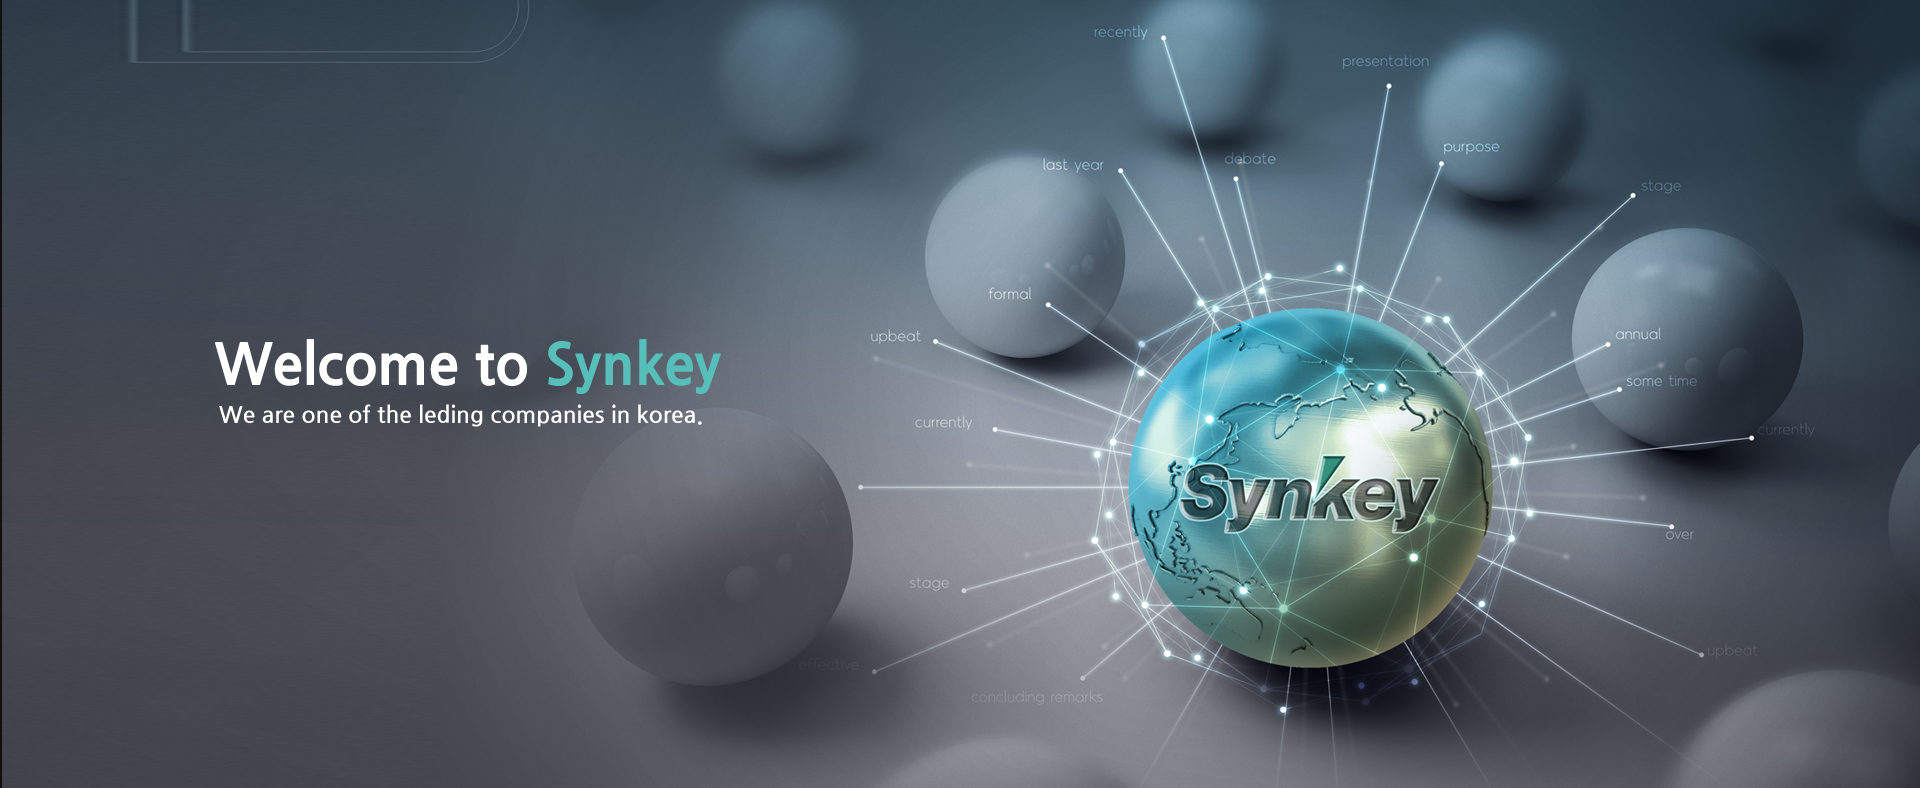 Welcome to Synkey / We are one of the leding companies in korea.